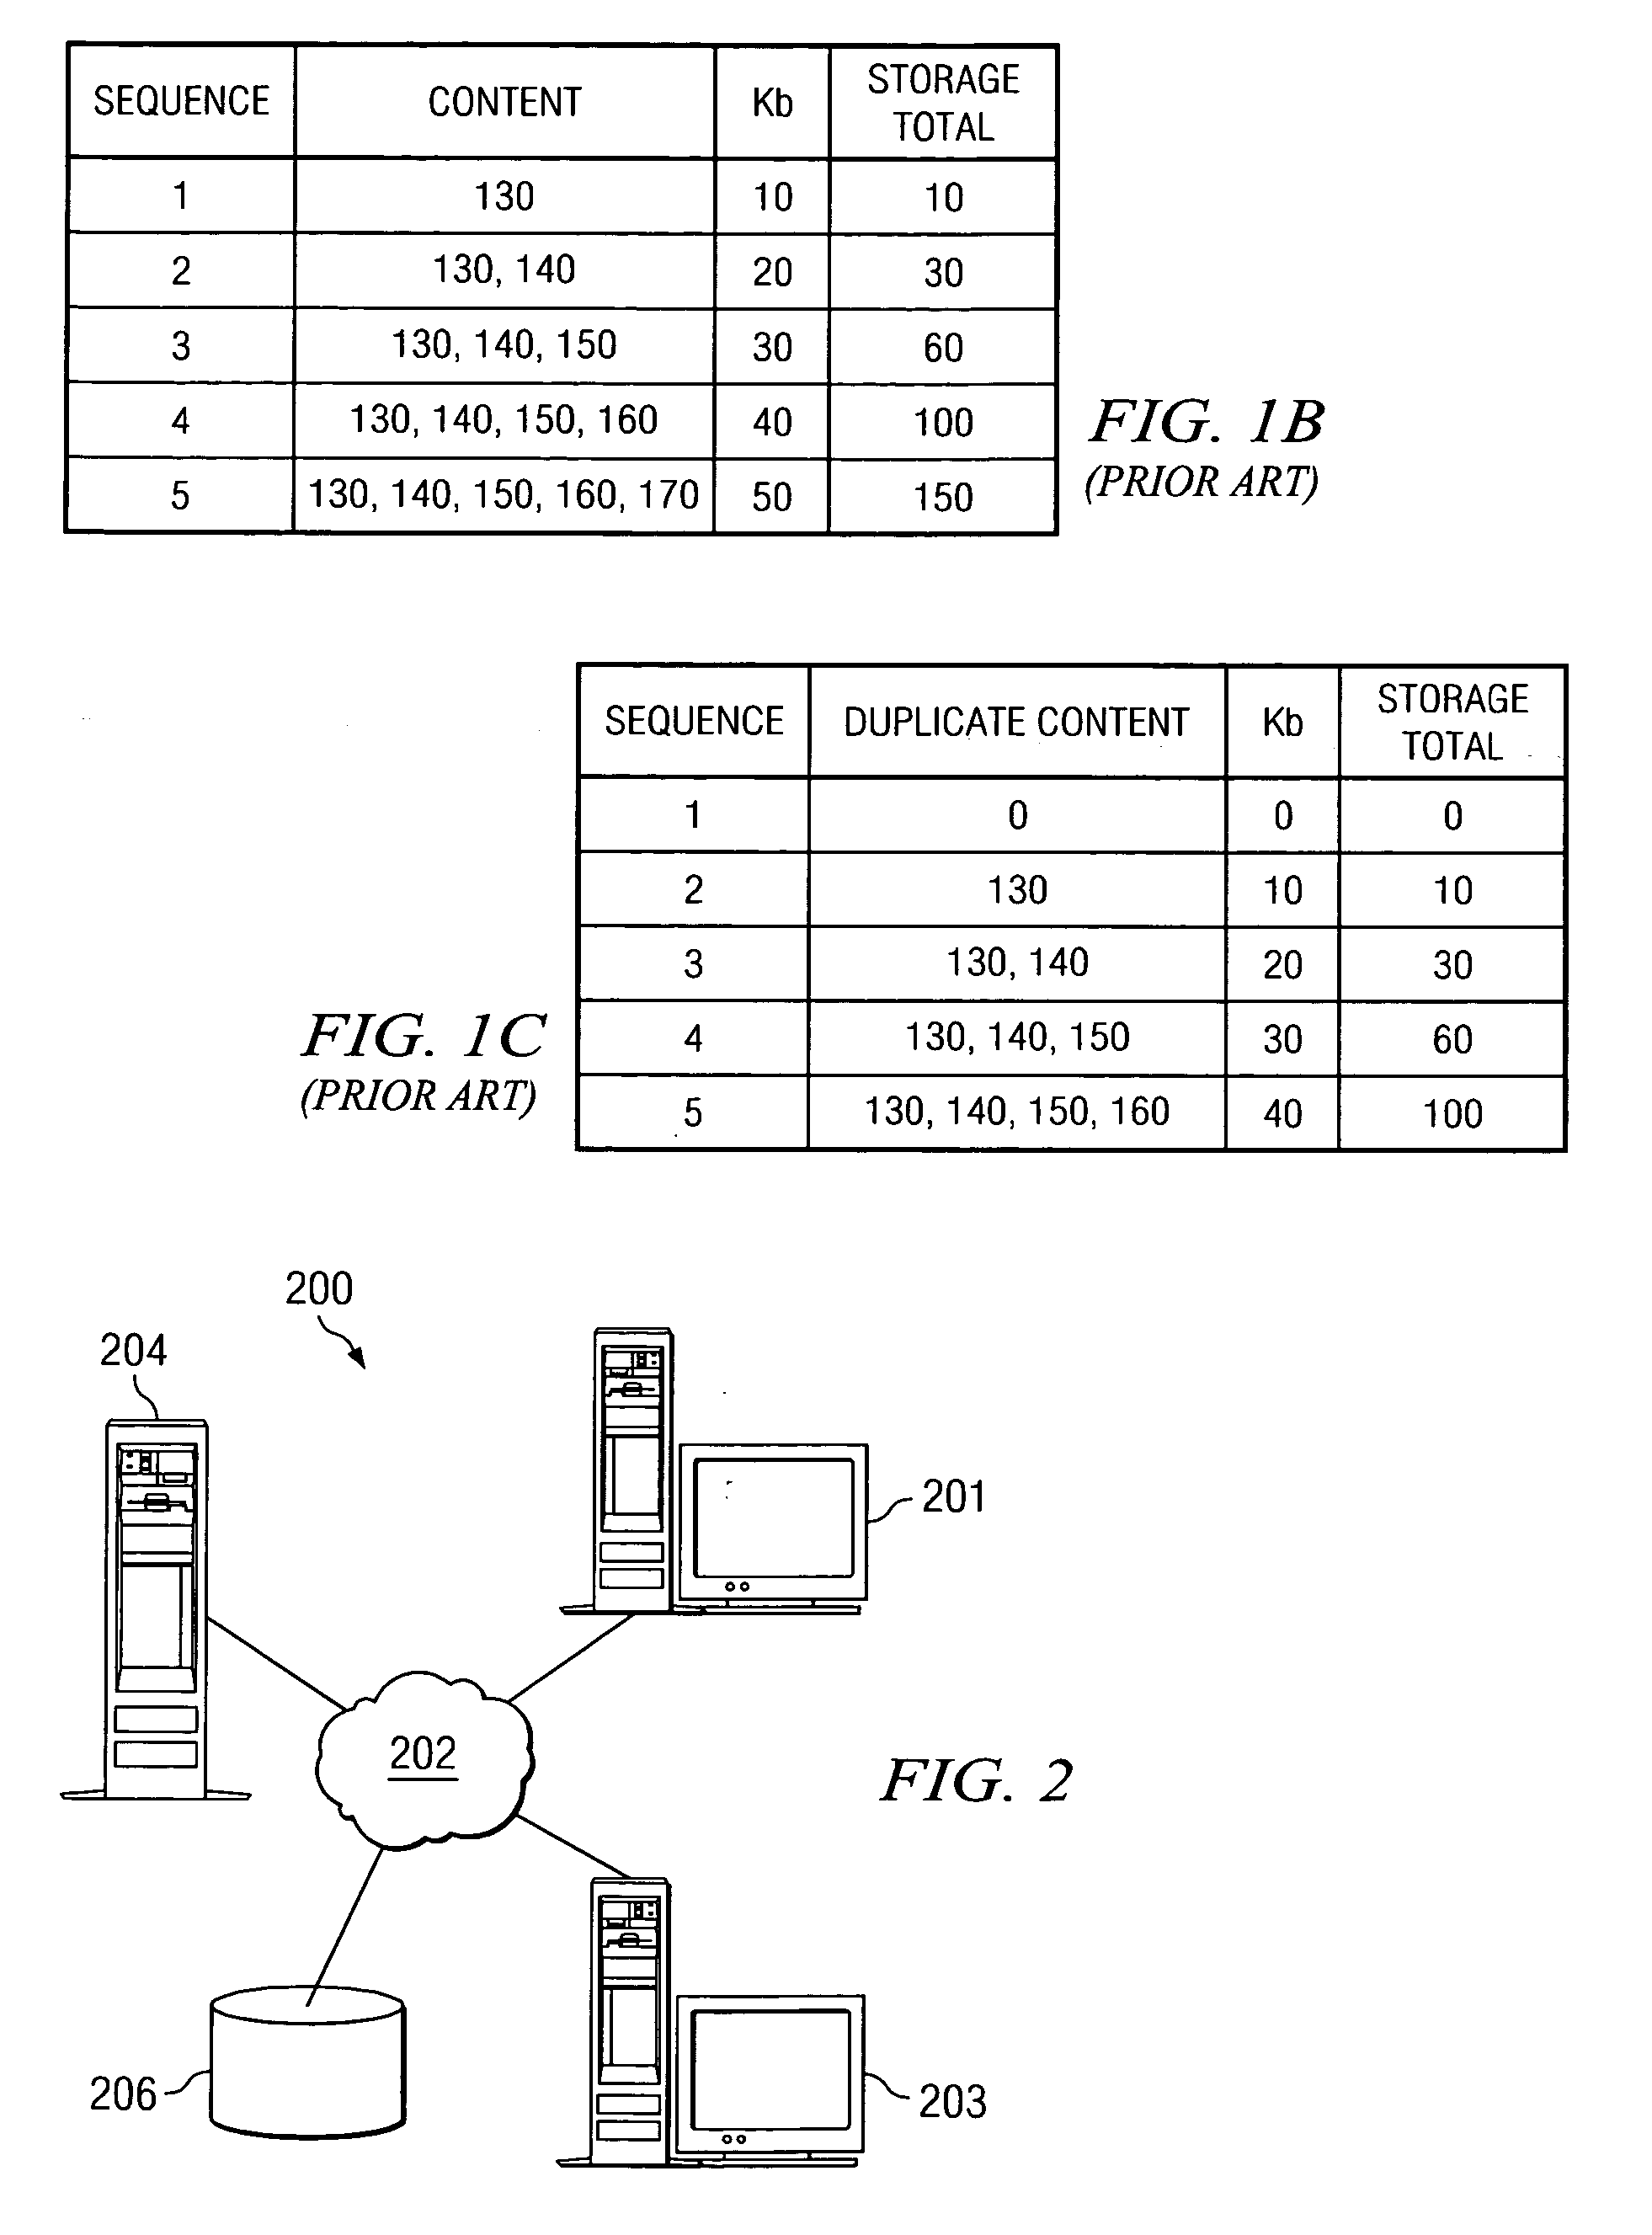 System and method for duplicate e-mail content detection and automatic doclink conversion